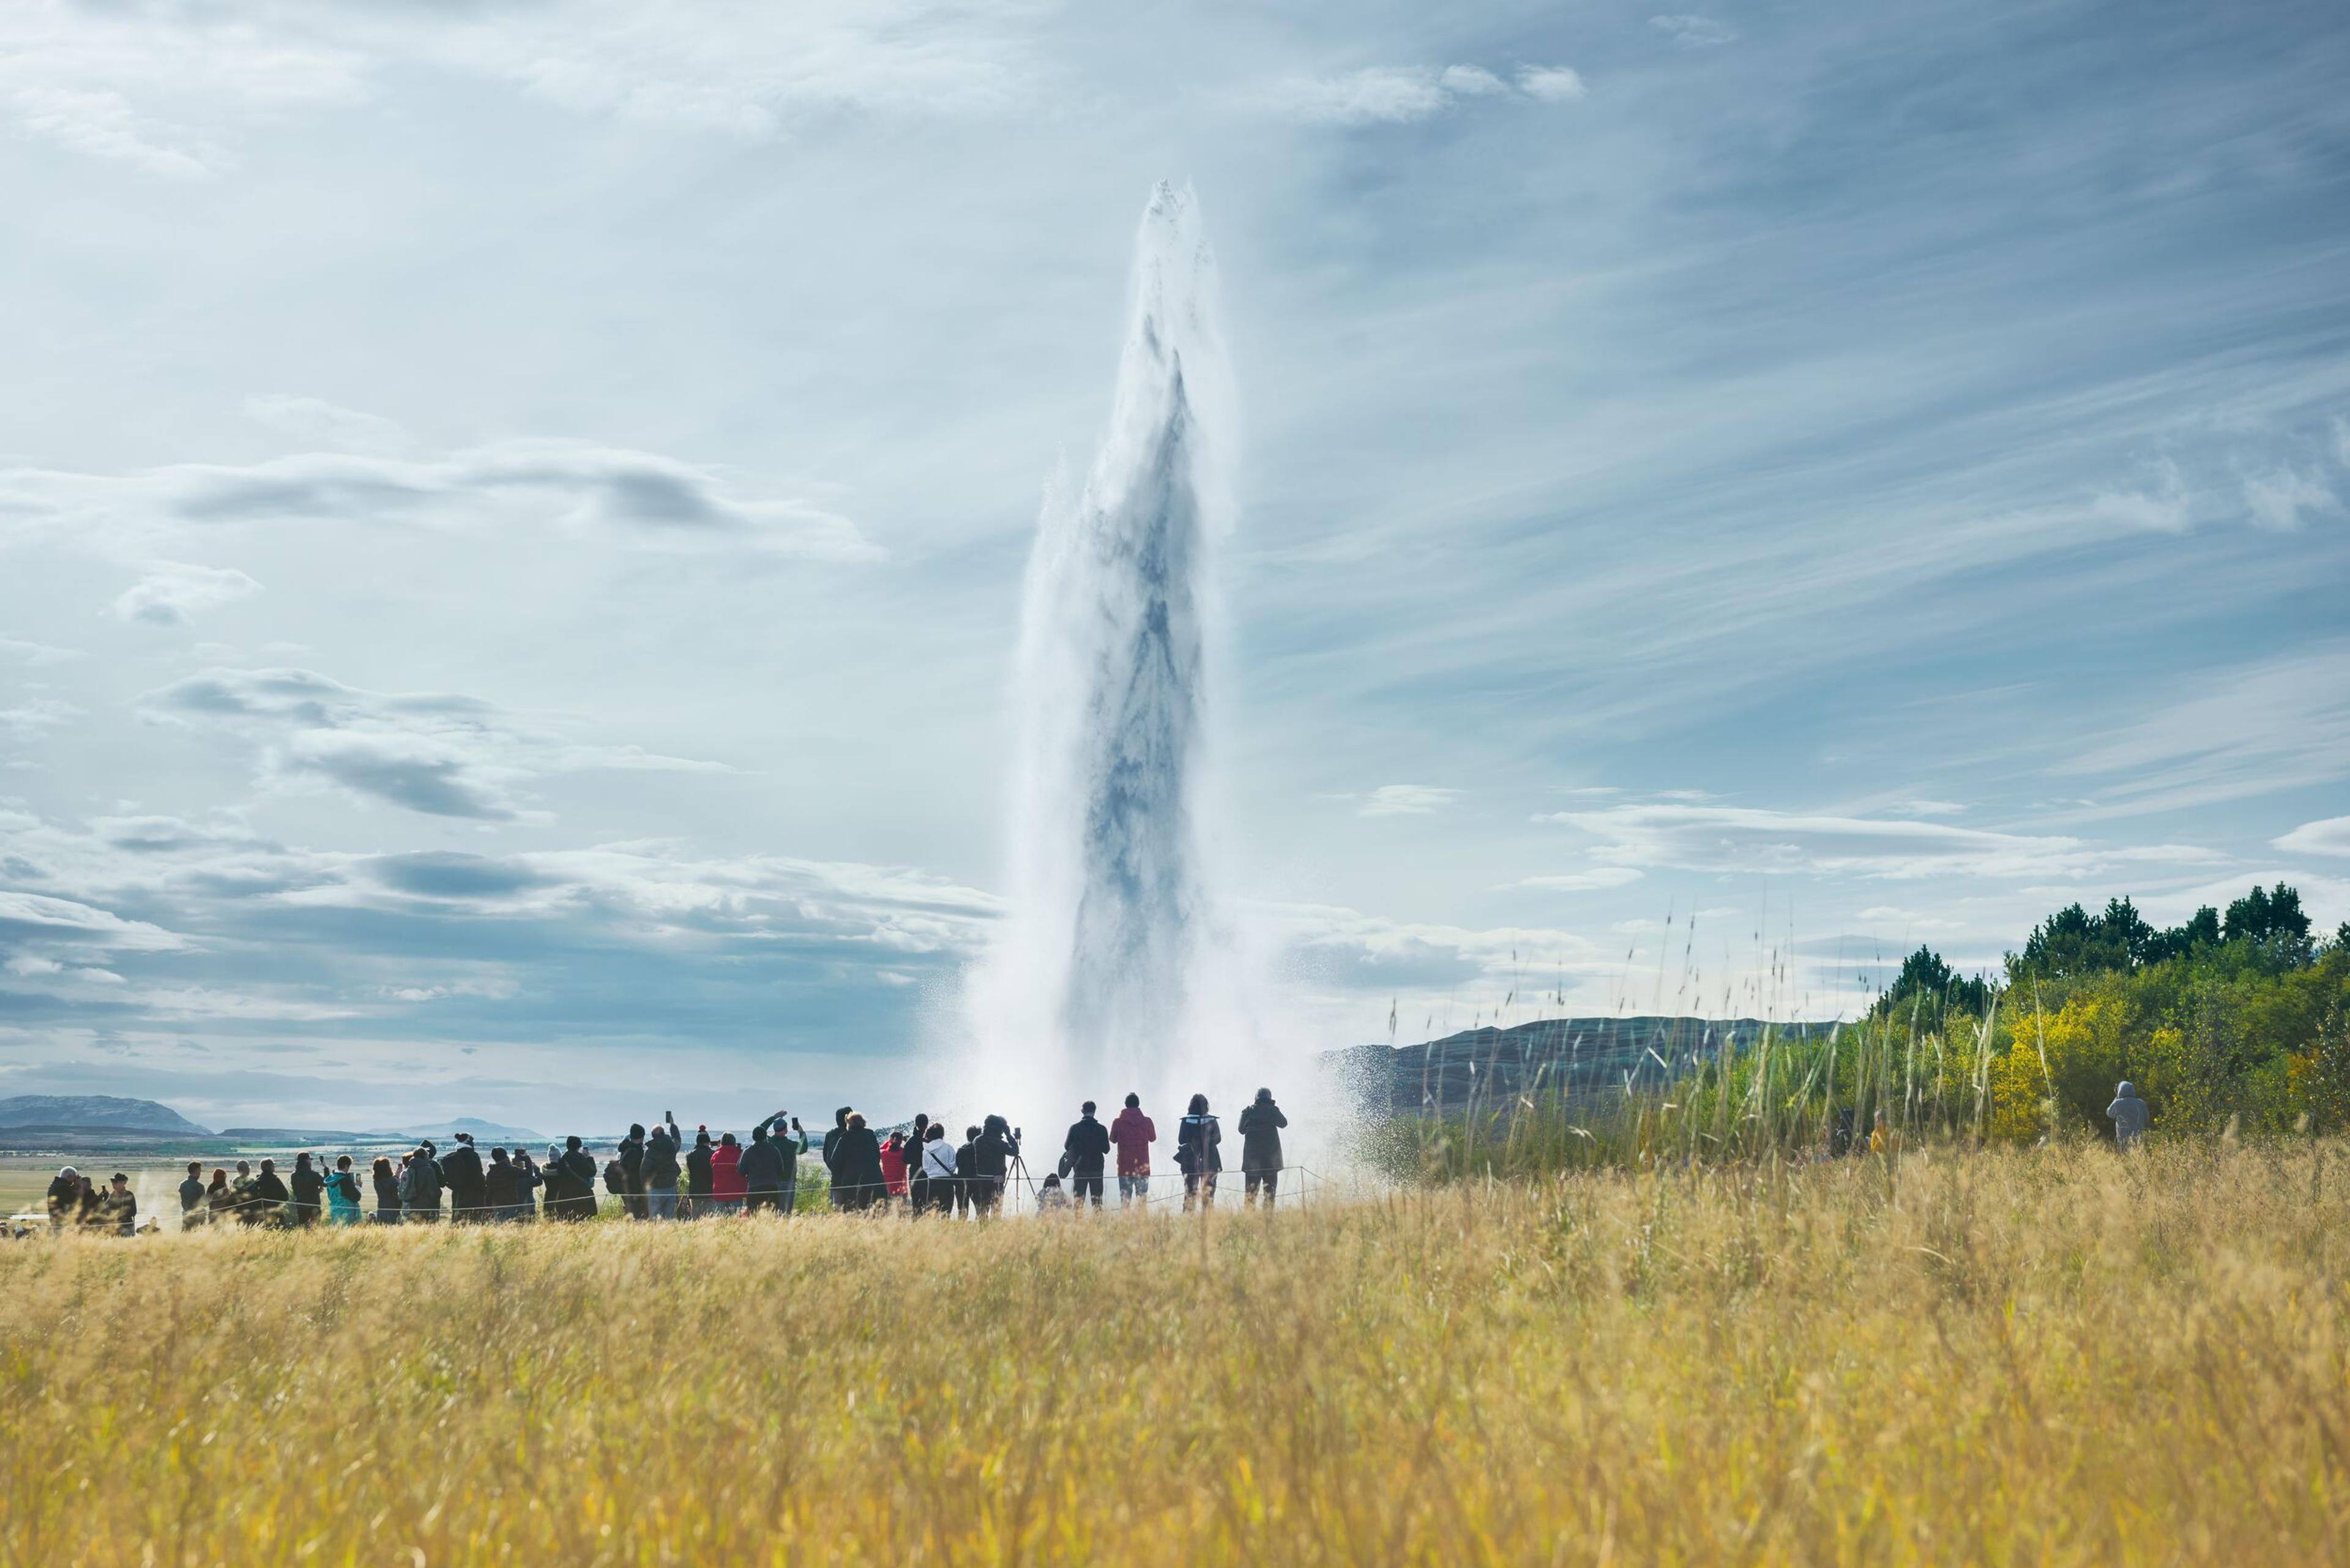 Tourists admiring the Strokkur geyser eruption on the Golden Circle route in Iceland.